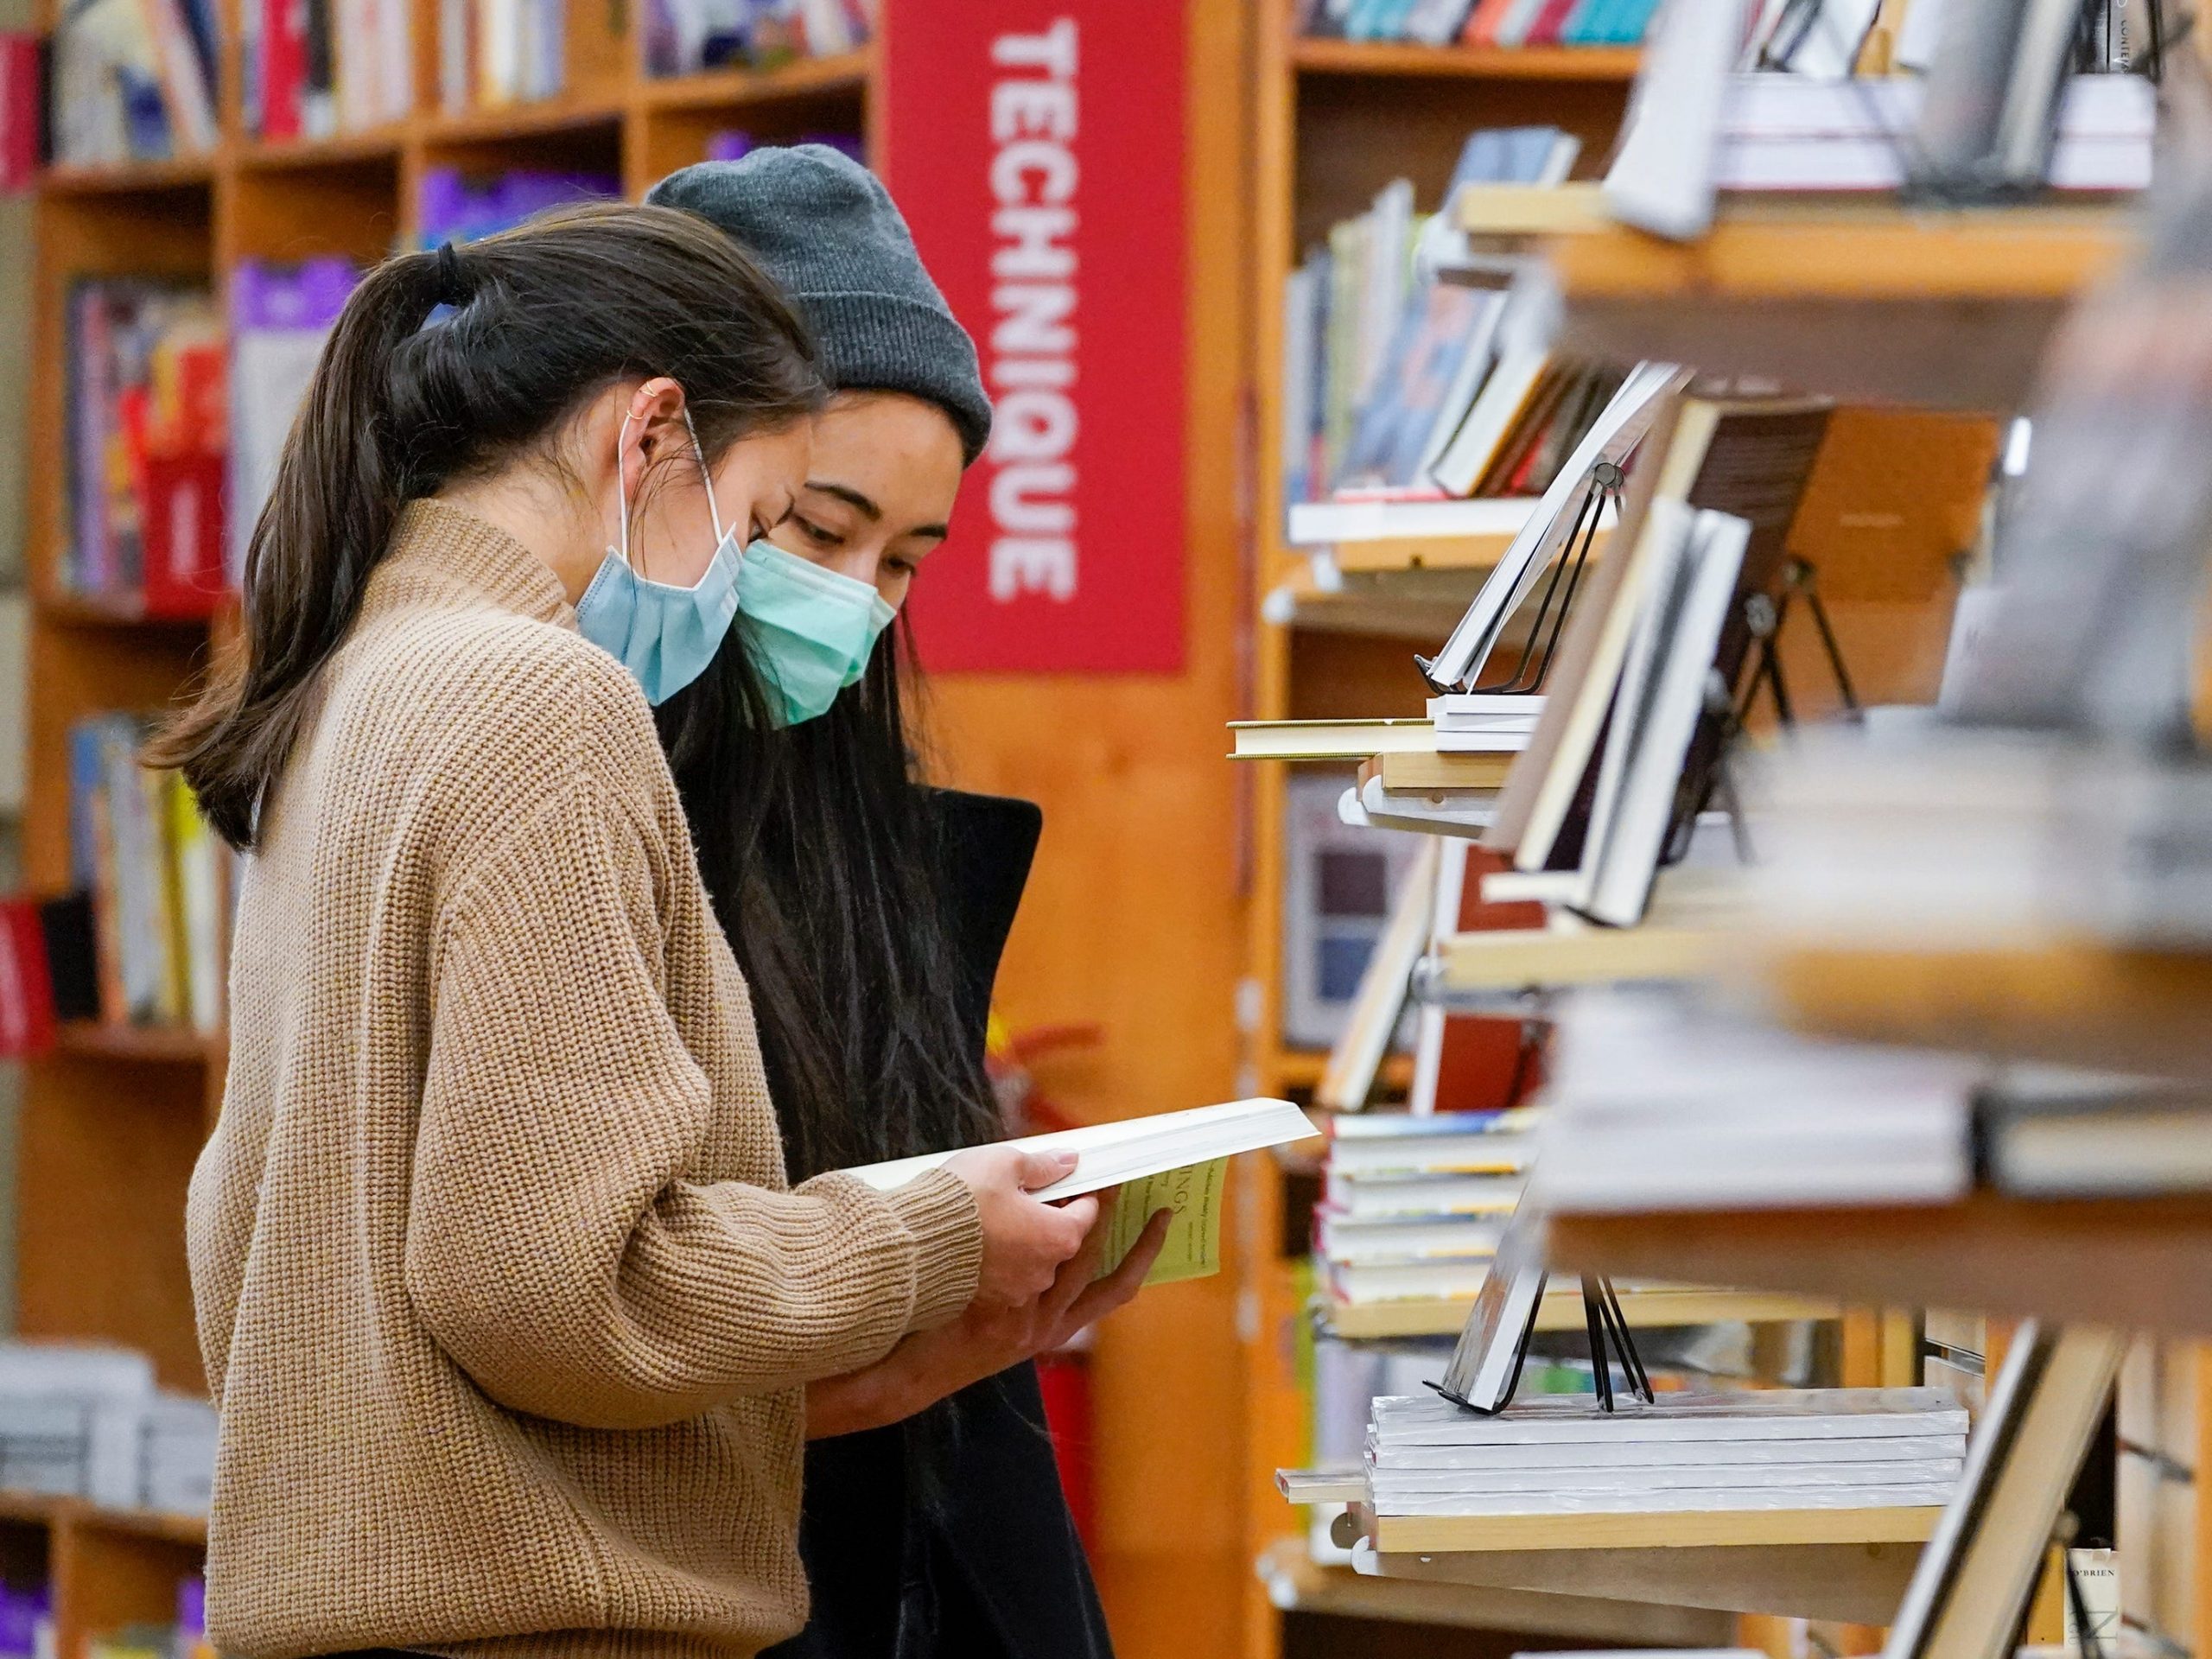 Two women wearing masks browse books at The Strand Bookstore in New York City